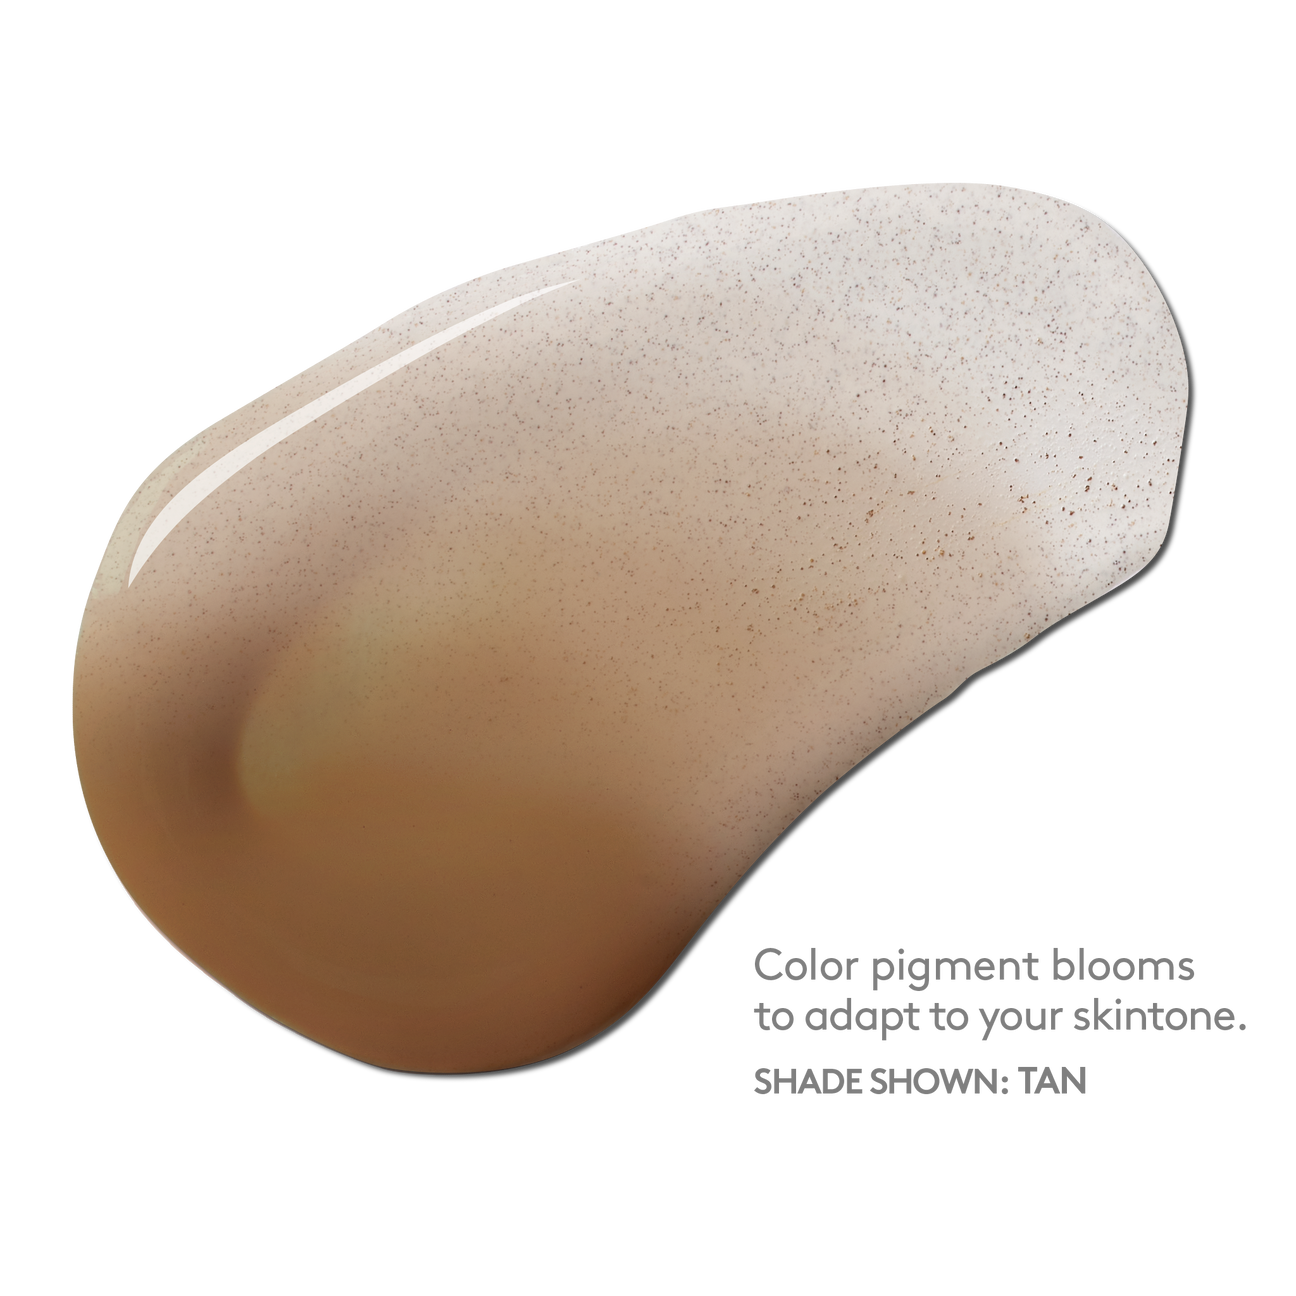 Trying Colorescience on Dark Skin - Is This the Perfect Match